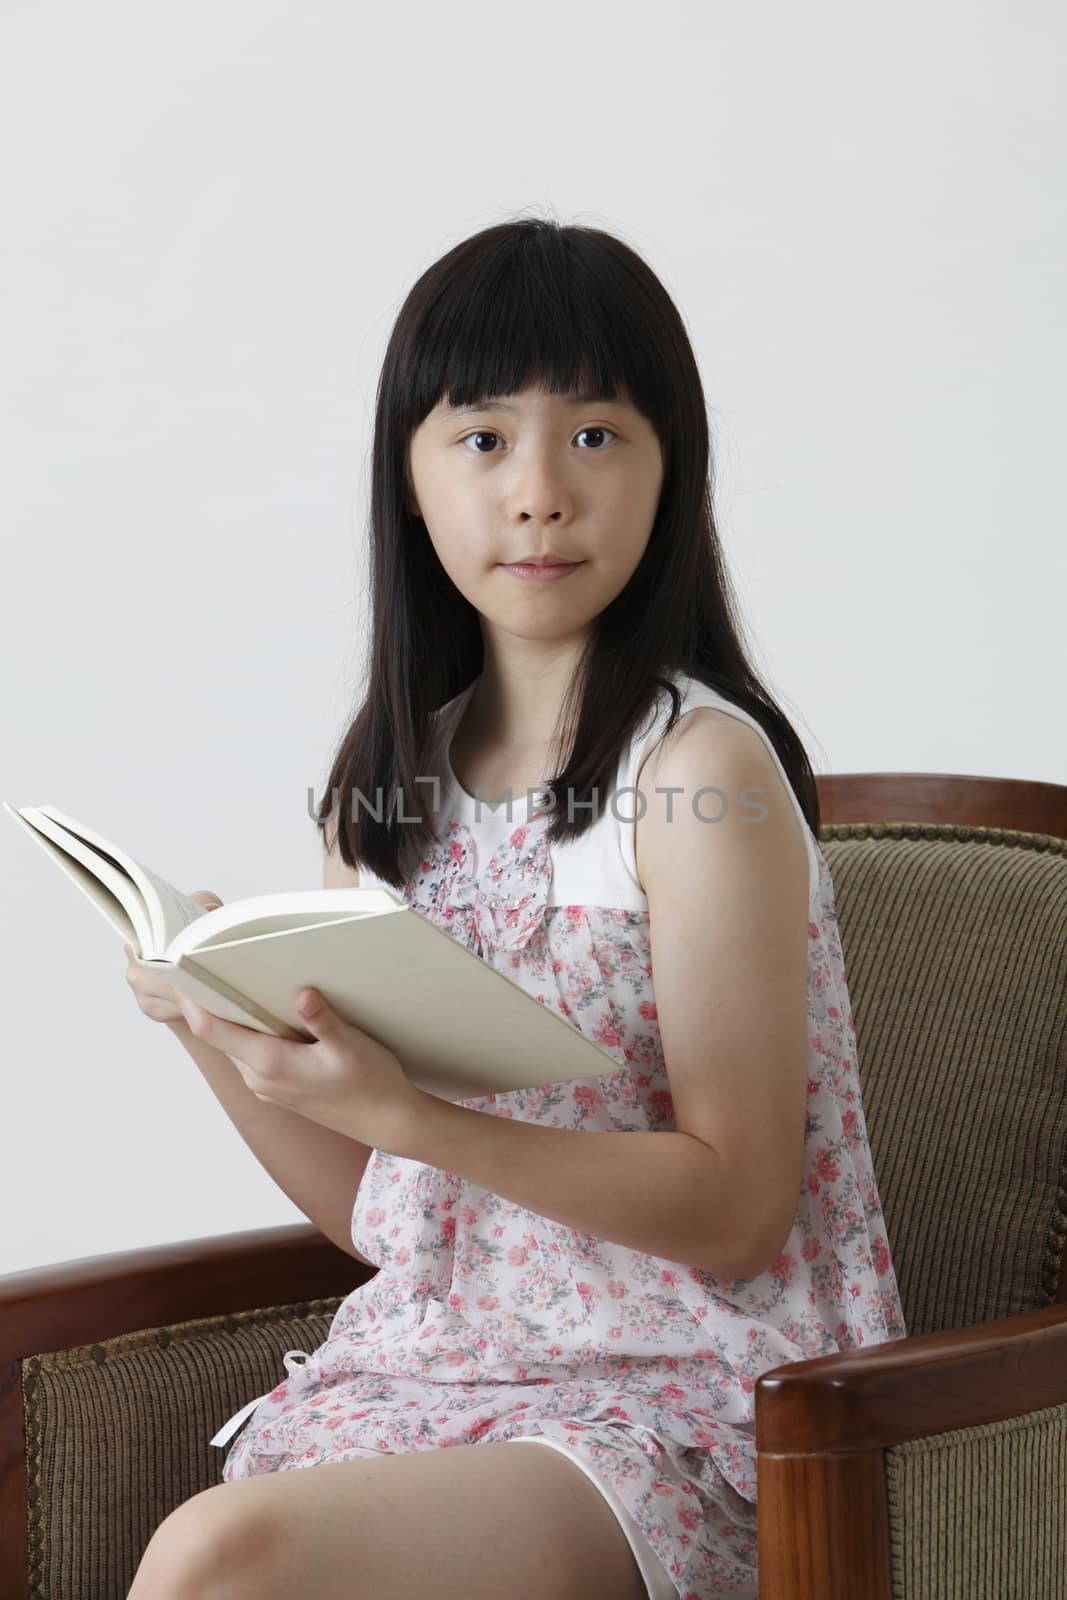 chinese girl holding book looking at camera